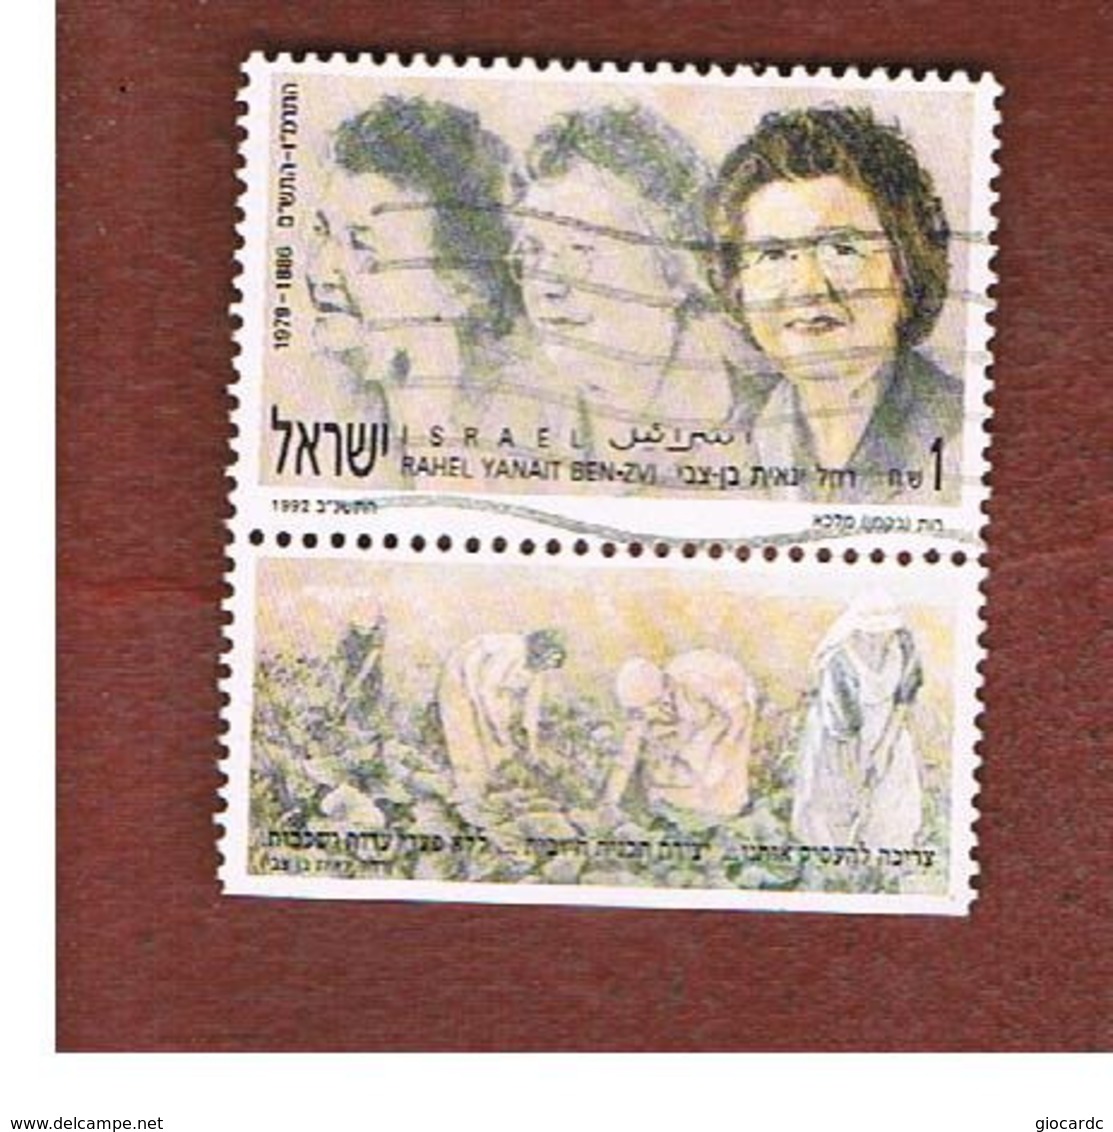 ISRAELE (ISRAEL)  - SG 1151 - 1991     R.Y. BEN-ZVI (WITH LABEL)    - USED ° - Used Stamps (with Tabs)